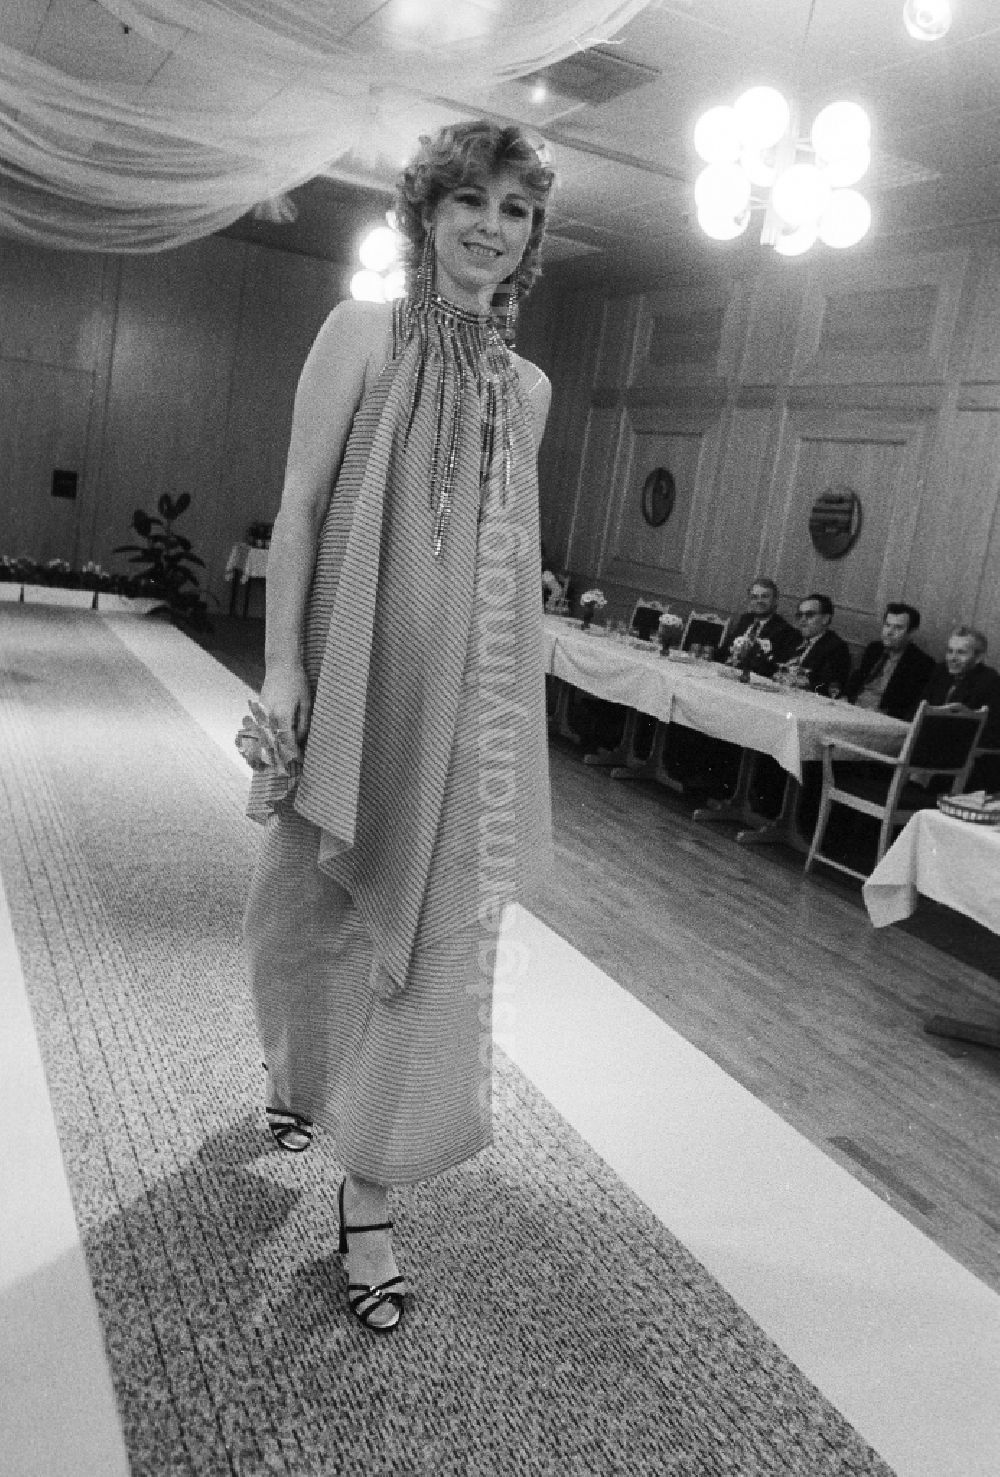 GDR picture archive: Berlin - Fashion show in the convention hall, today bcc Berlin Congress centre, in Berlin, the former capital of the GDR, German democratic republic